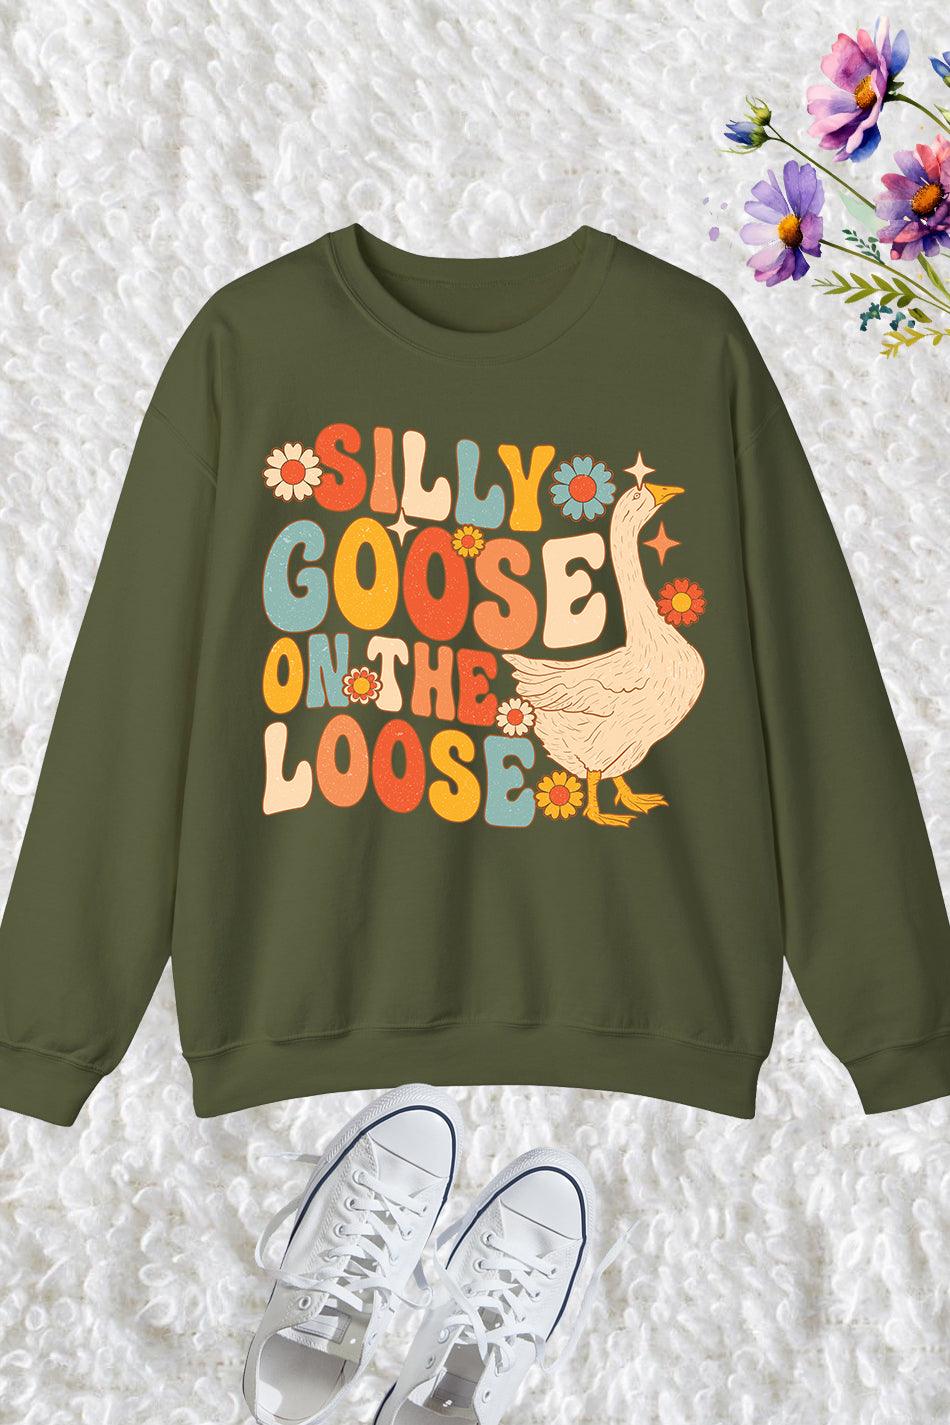 Silly Goose on the Loose Groovy Canada goose Sweatshirt